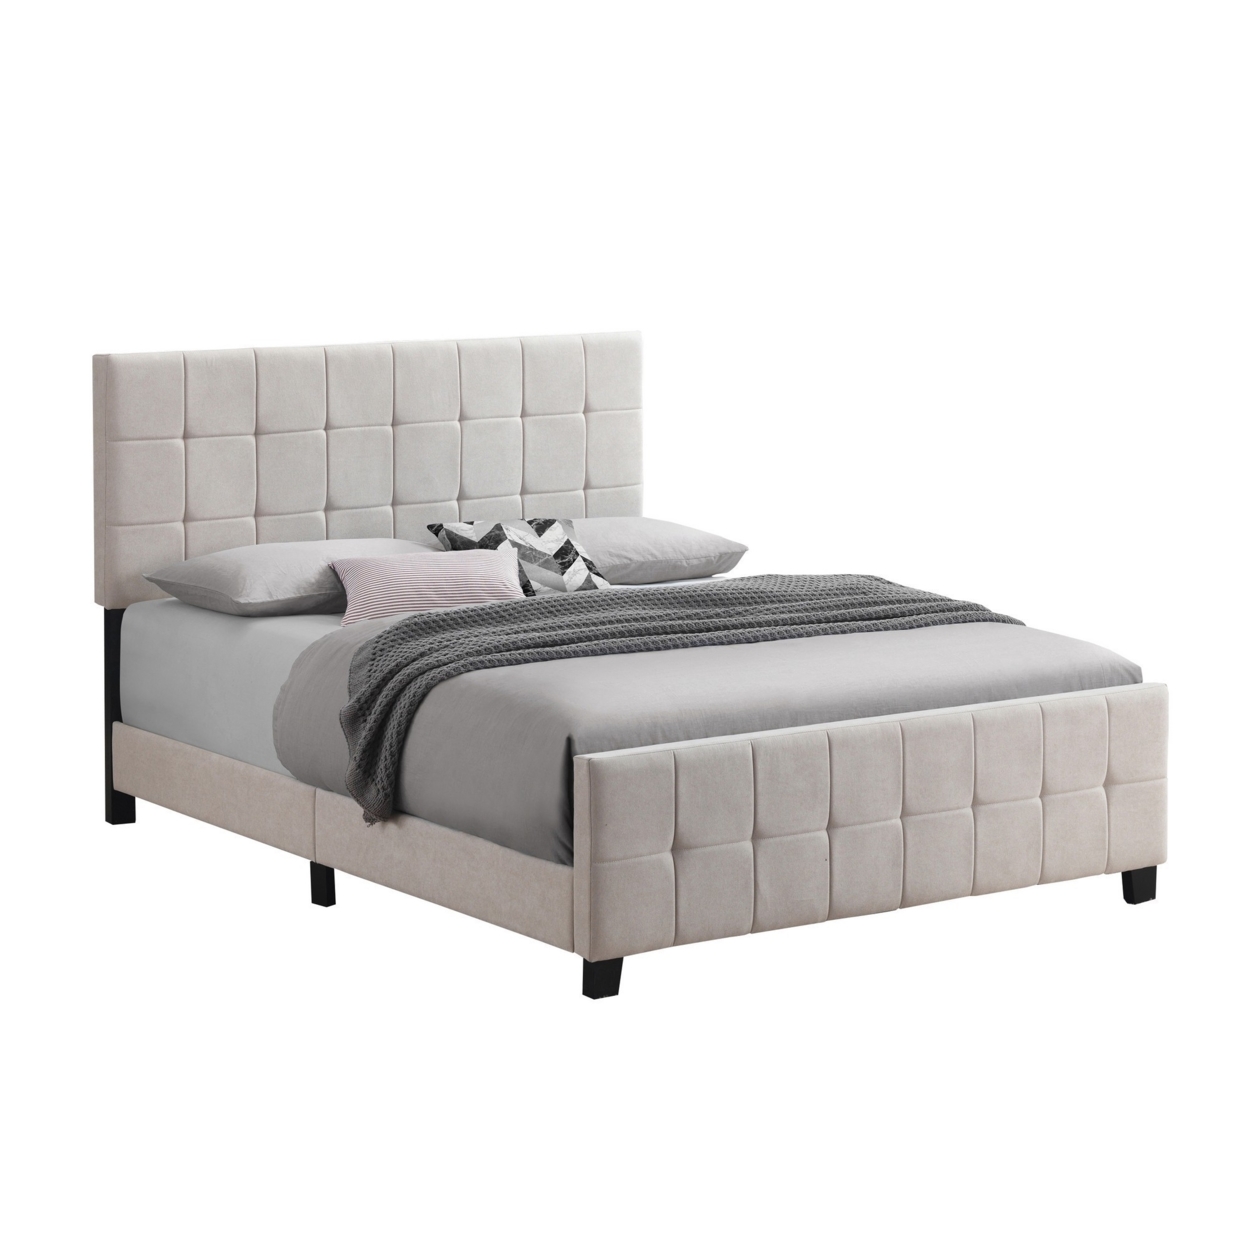 Feny King Bed, Light Gray Fabric Upholstered, Stitched Grid Design